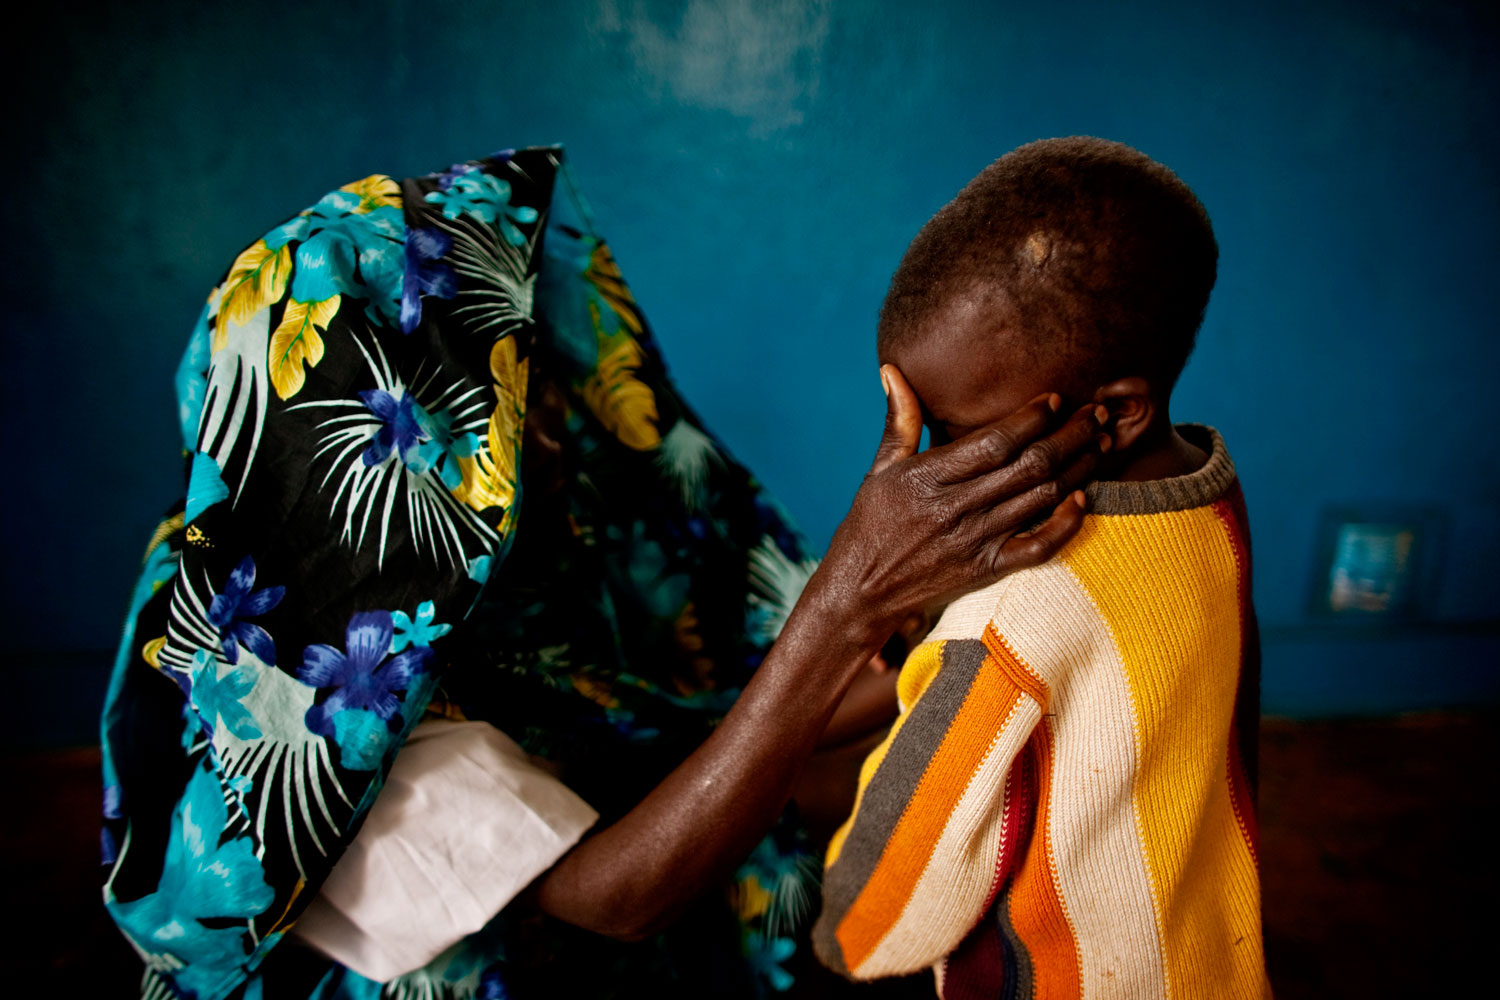 Portrait #7
                              February 21, 2011. A mass rape victim comforts her son in the town of Fizi, Congo. Her identity has been concealed for security reasons and because rape carries strong social stigma.